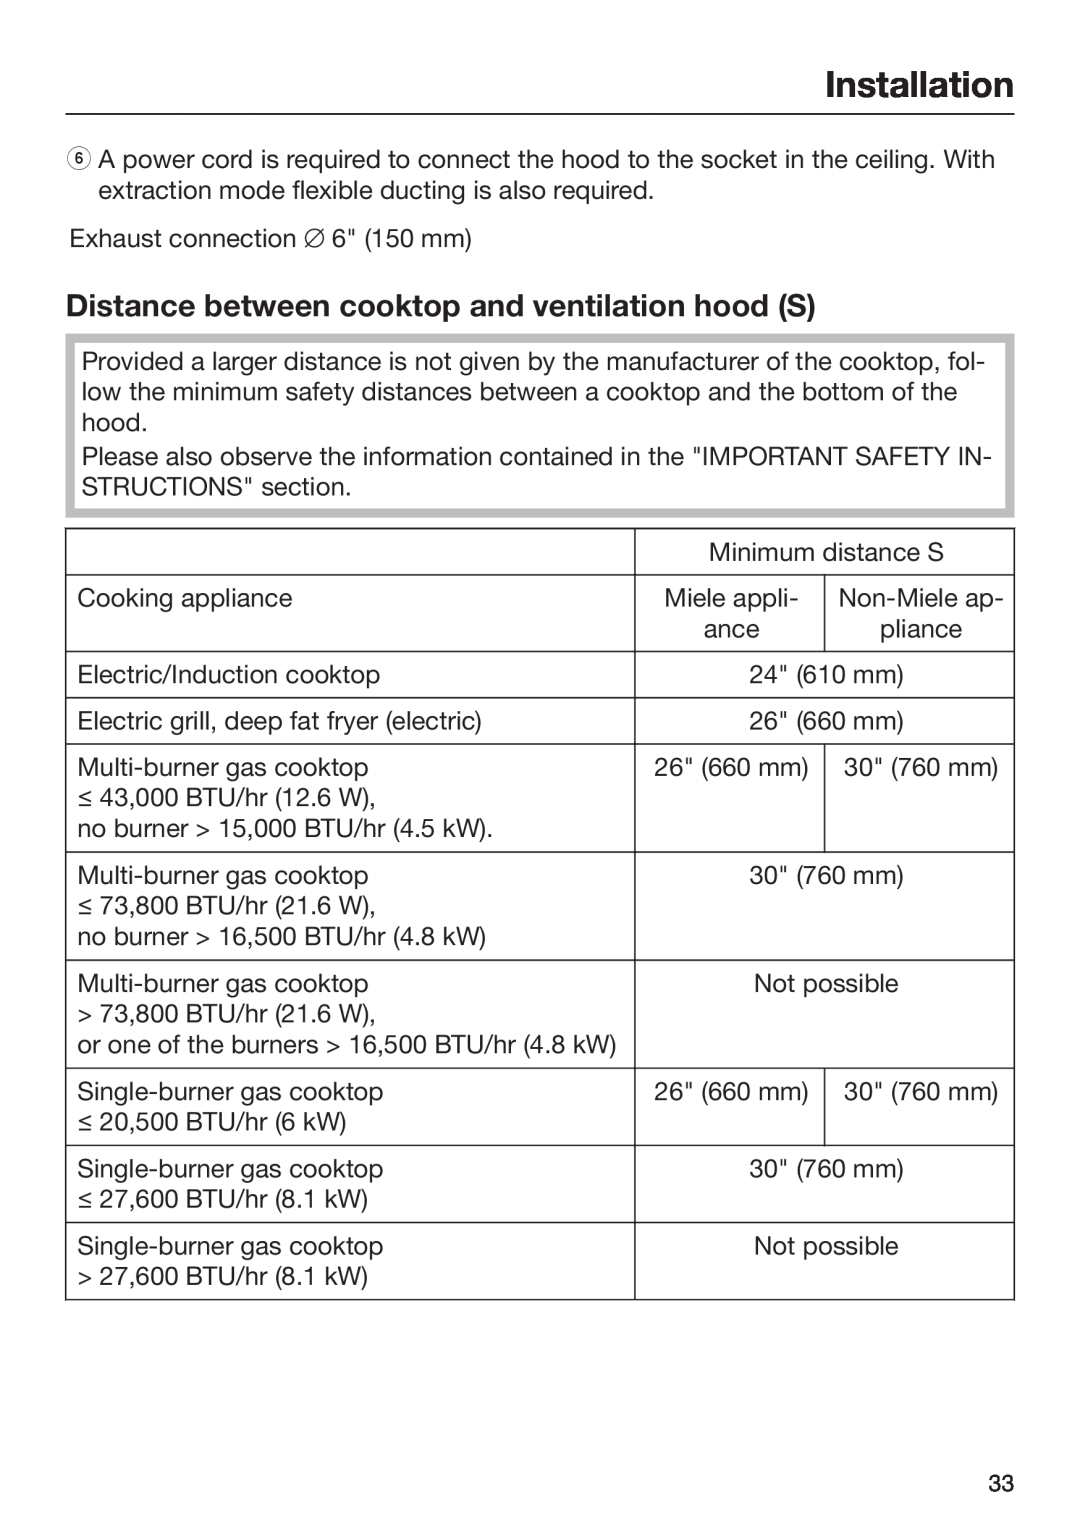 Miele M.-Nr. 09 805 980 installation instructions Distance between cooktop and ventilation hood S, Installation 